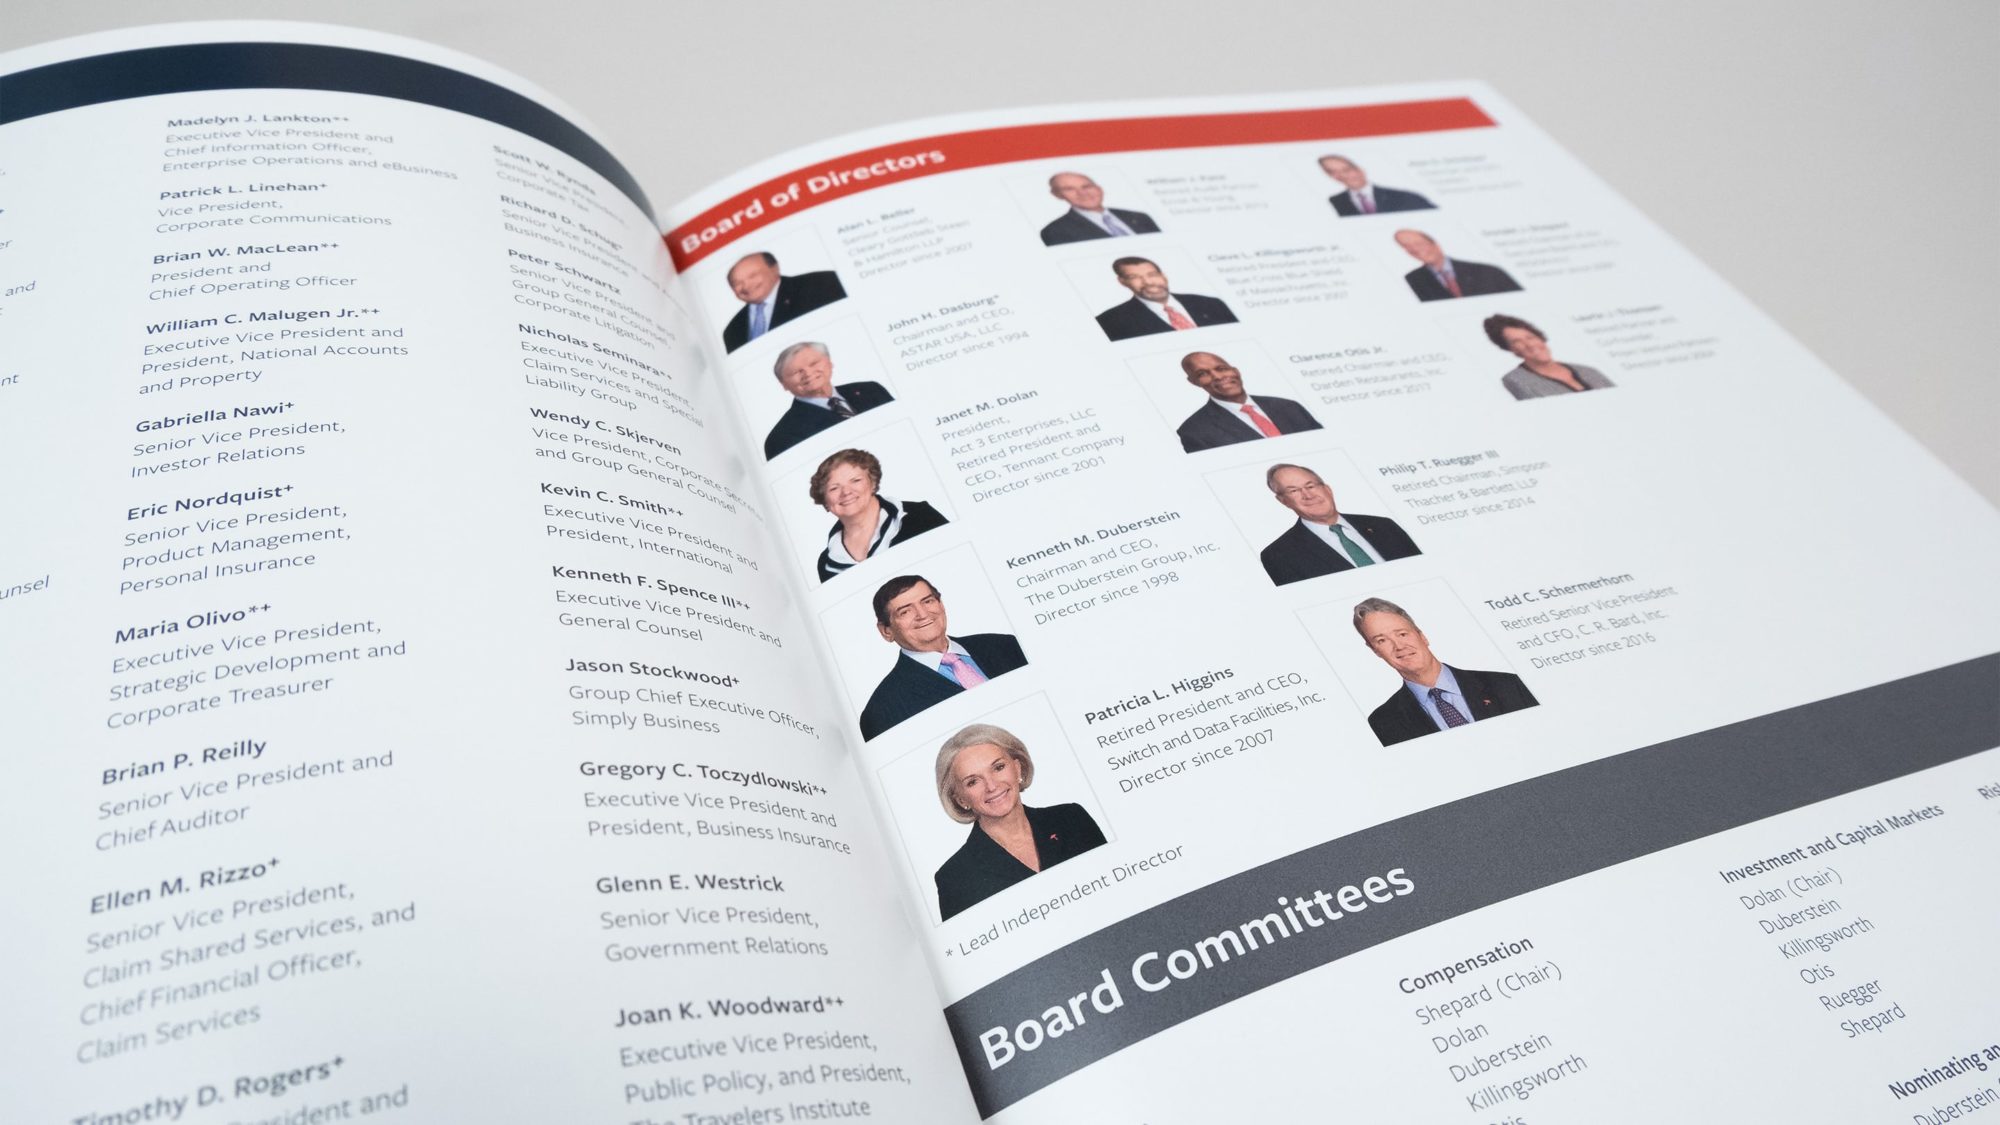 Page showing Travelers' Board of Directors with headshots, names, and titles